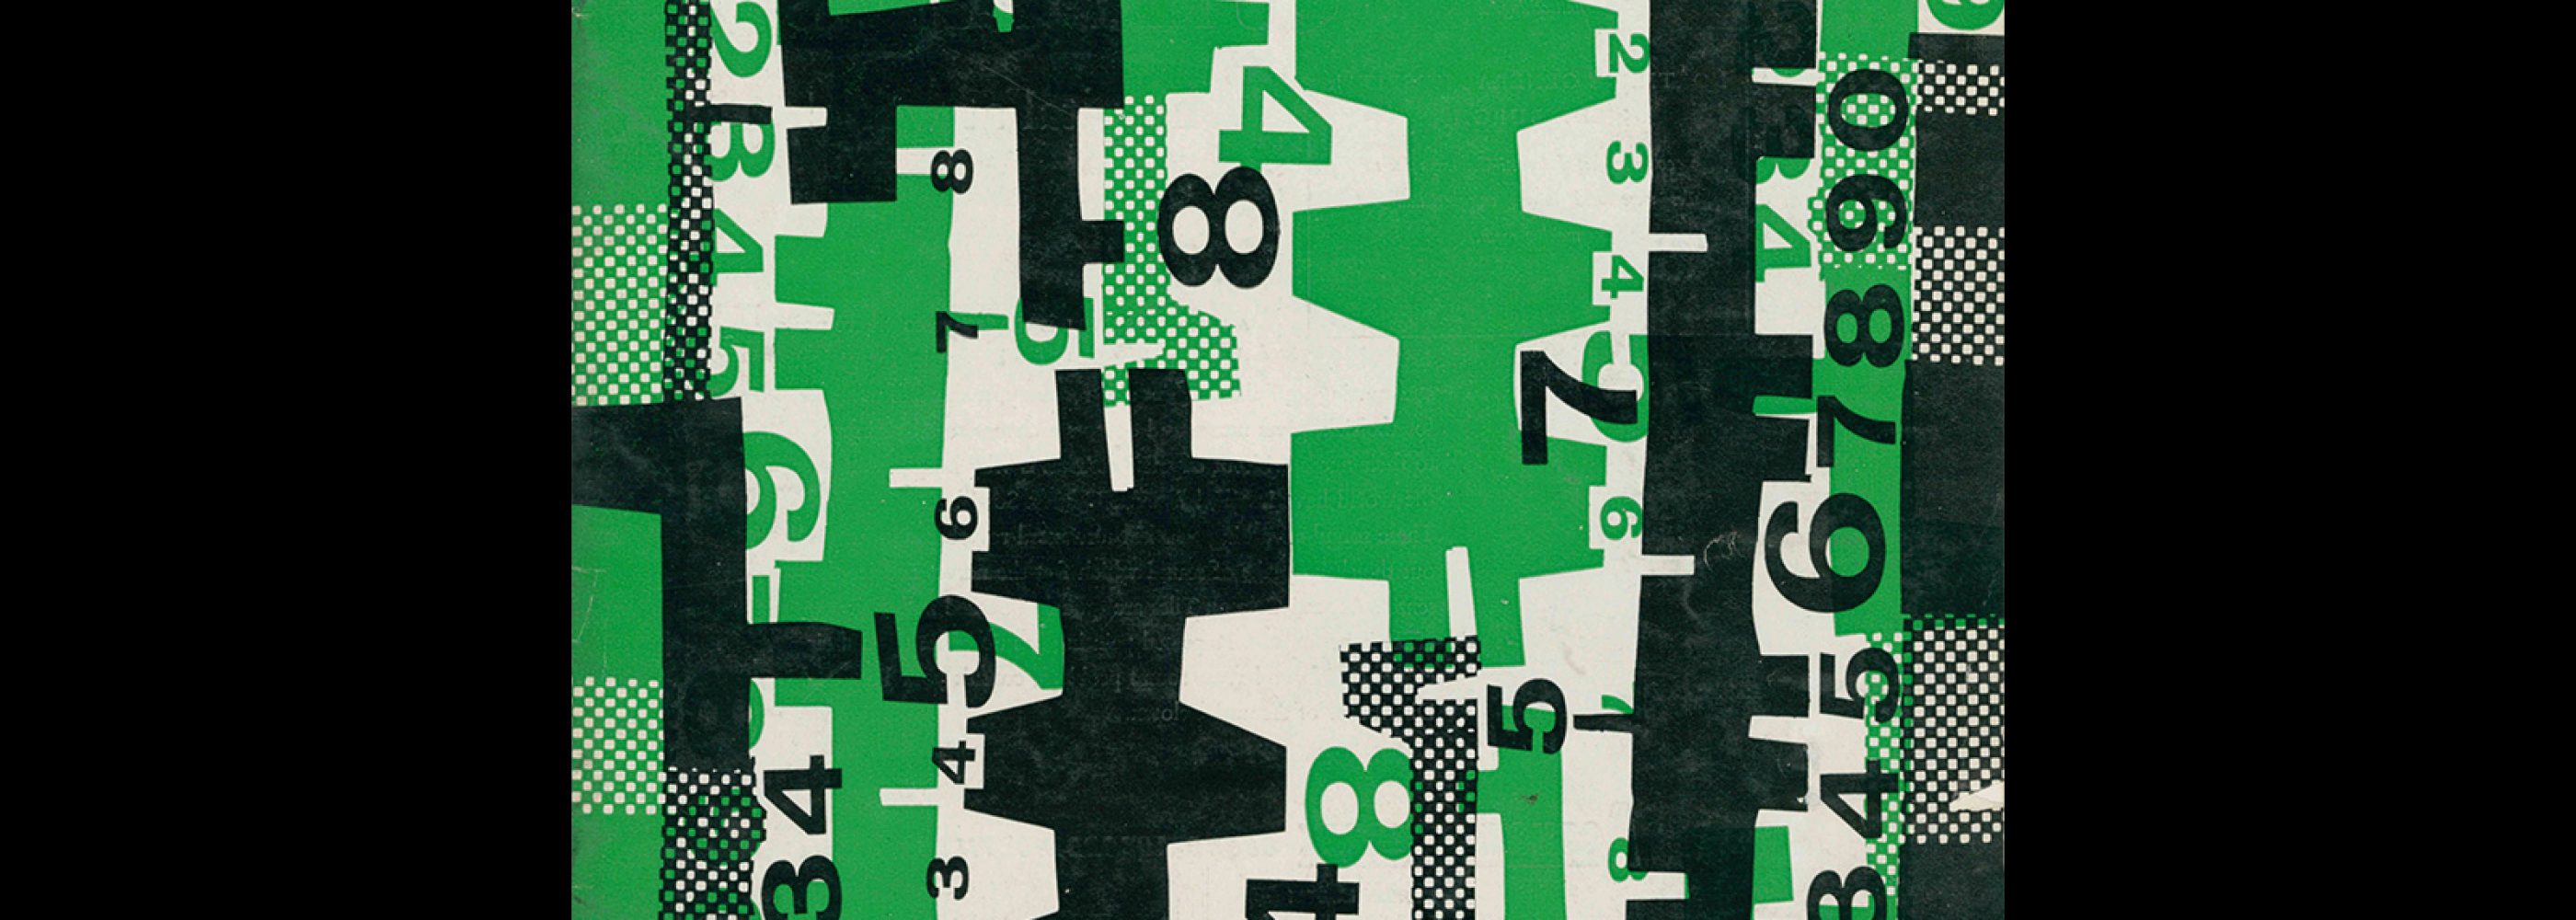 Architectural Design, August 1965. Cover design by Theo Crosby